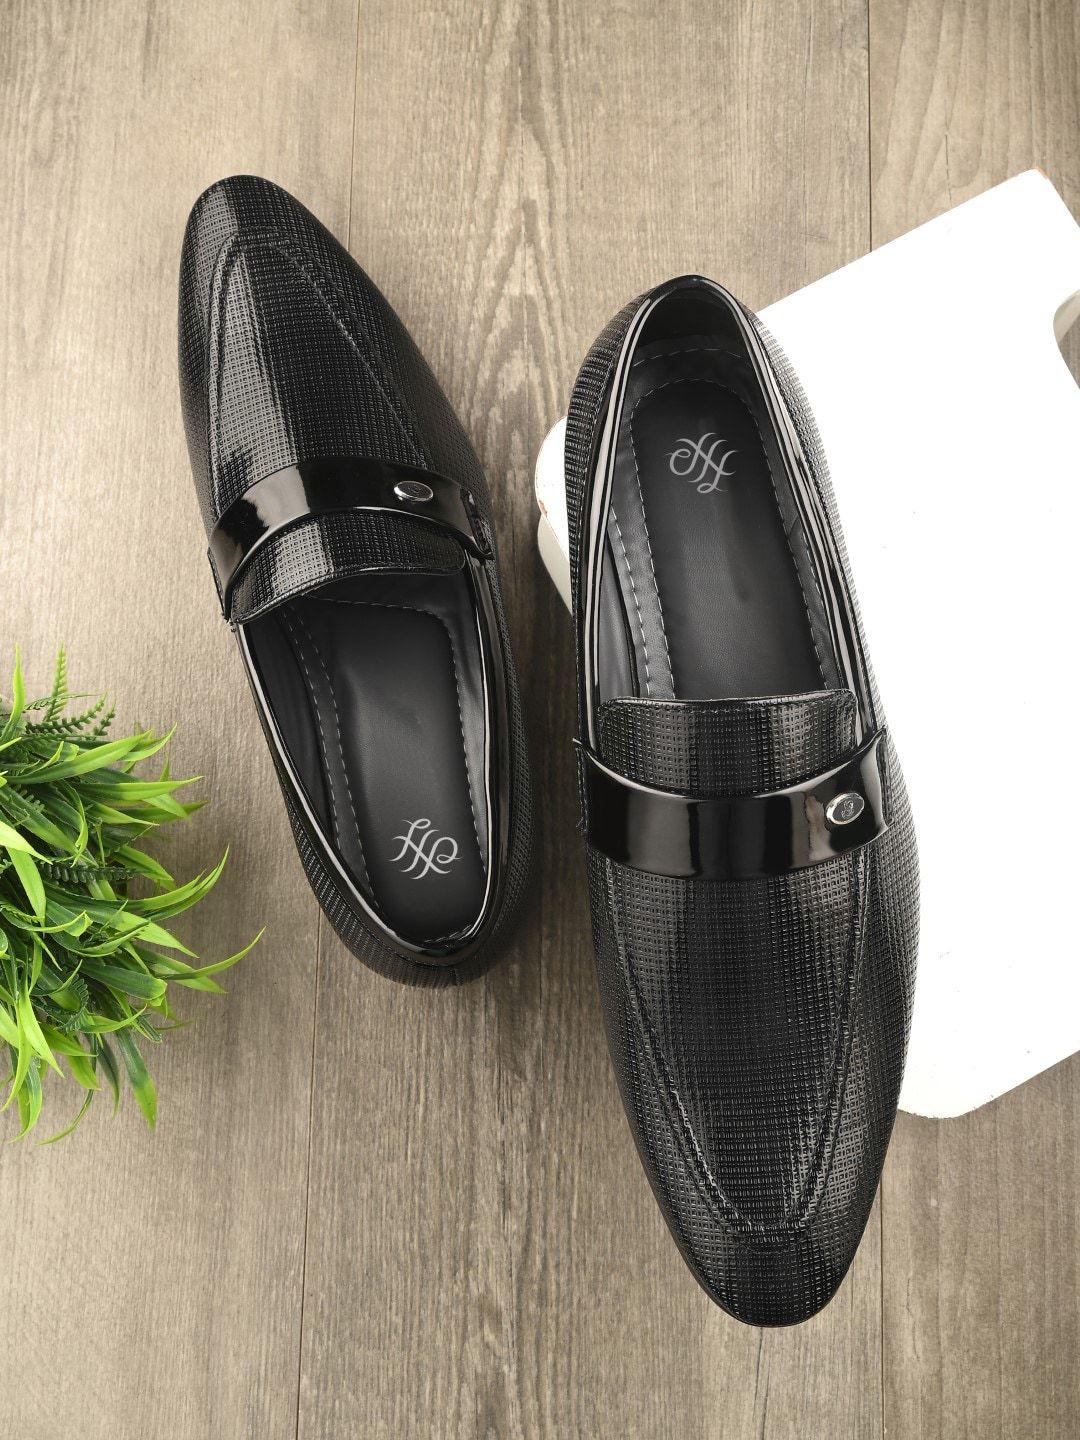 house-of-pataudi-men-textured-formal-loafers